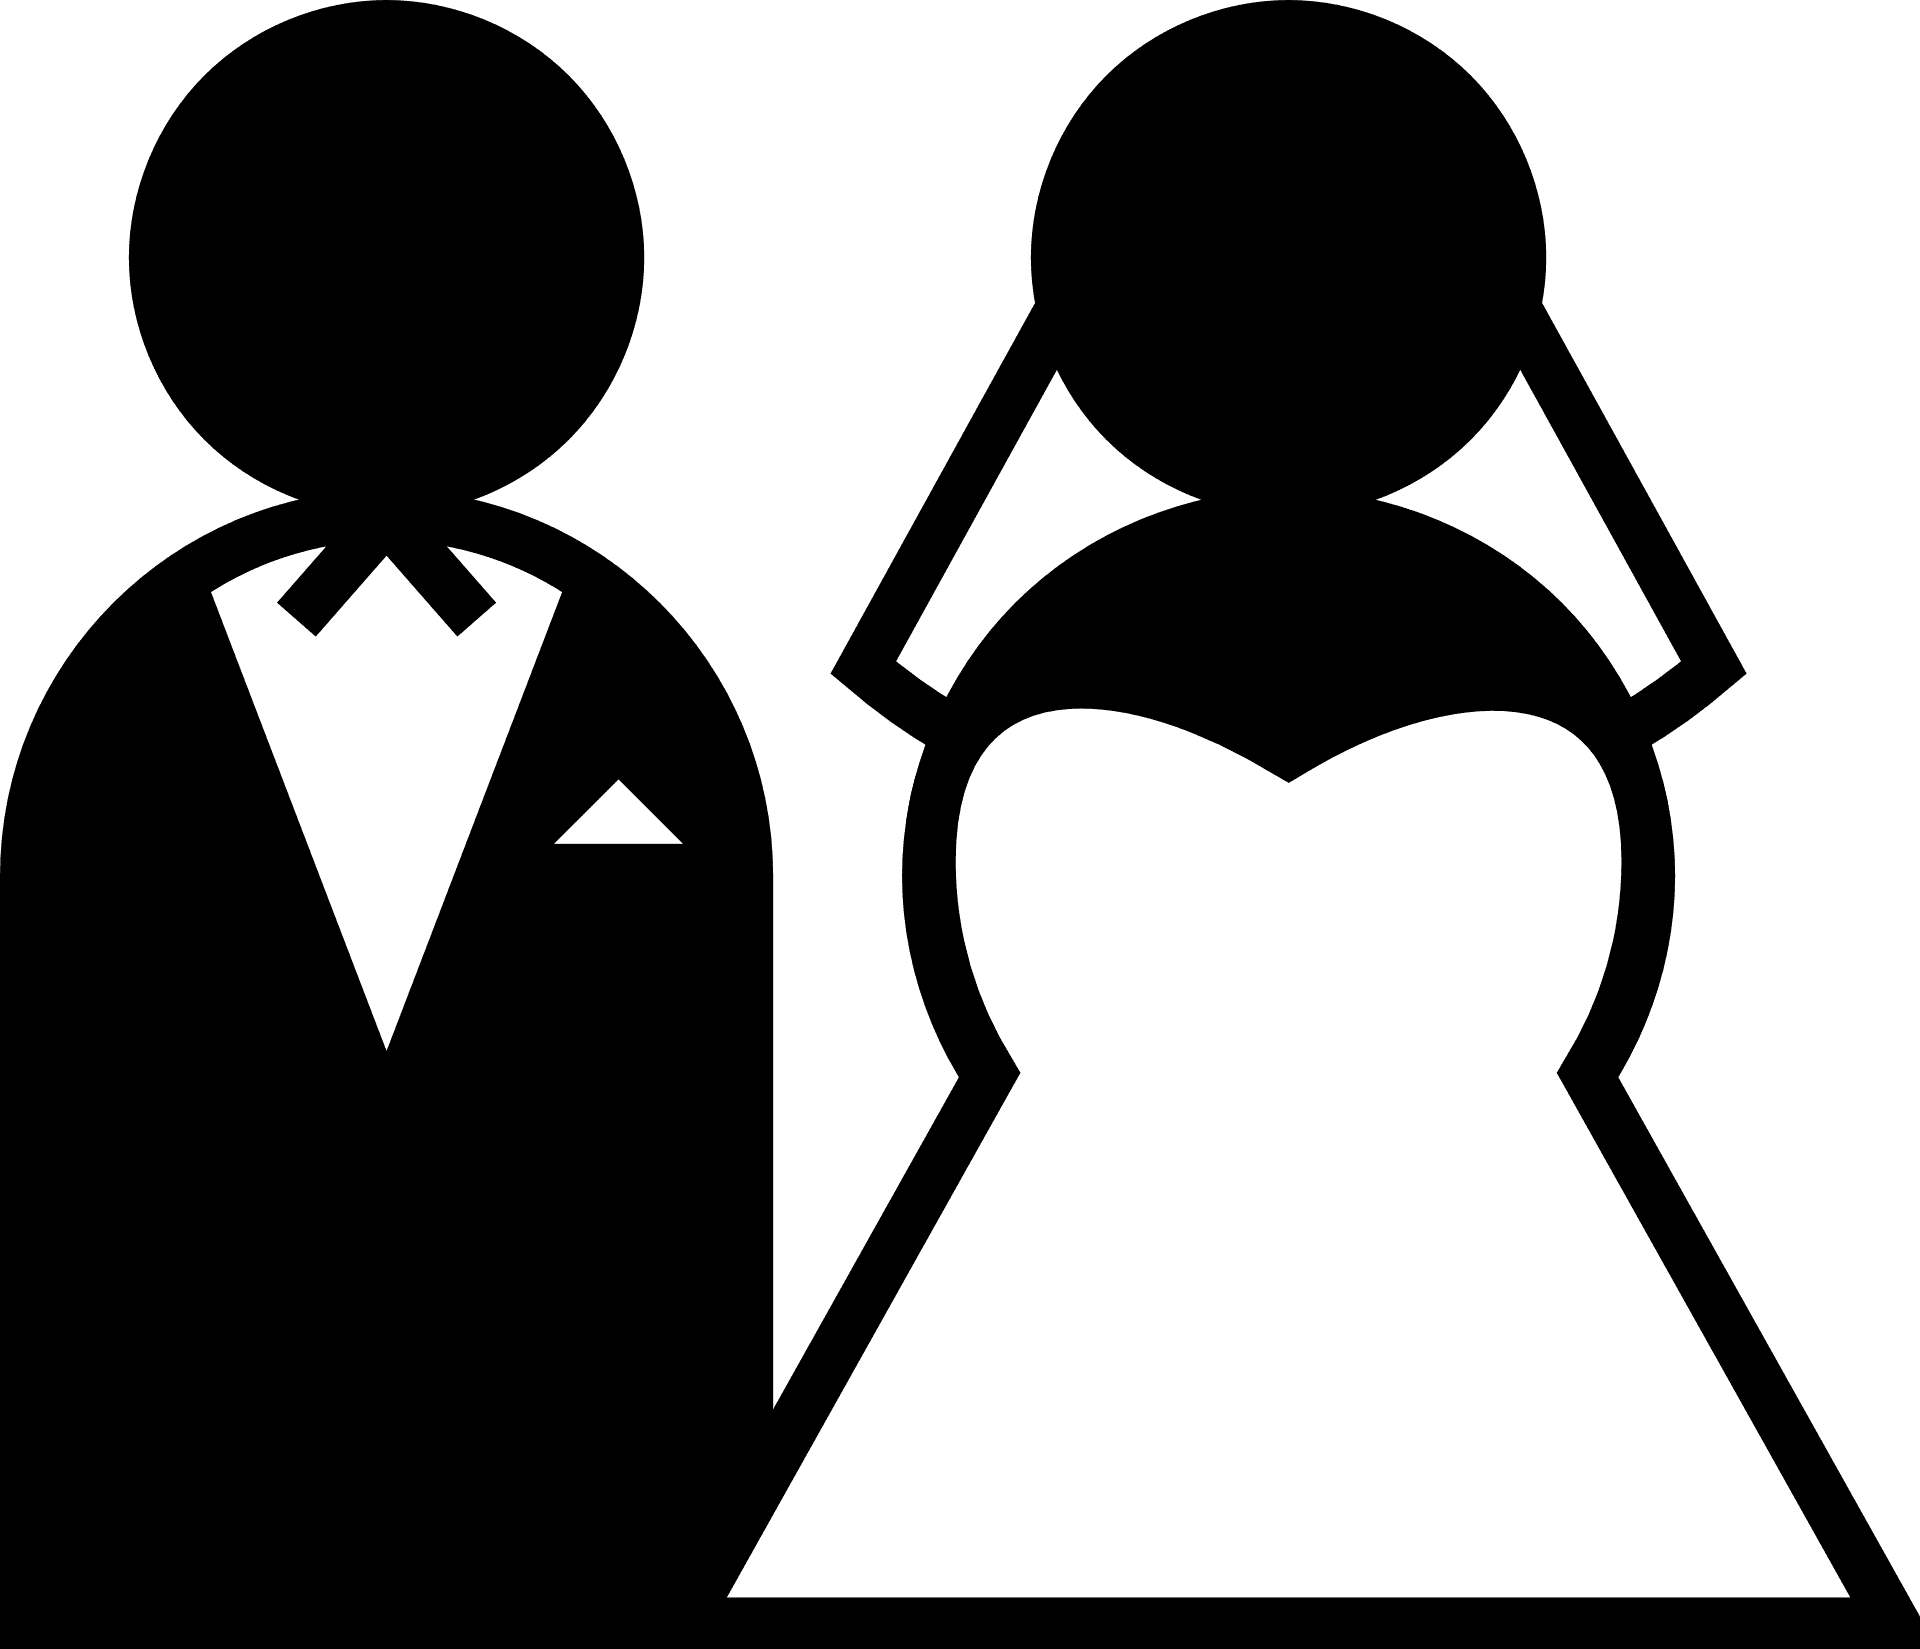 Psychosocial Profile and Perspectives of Foreign Brides